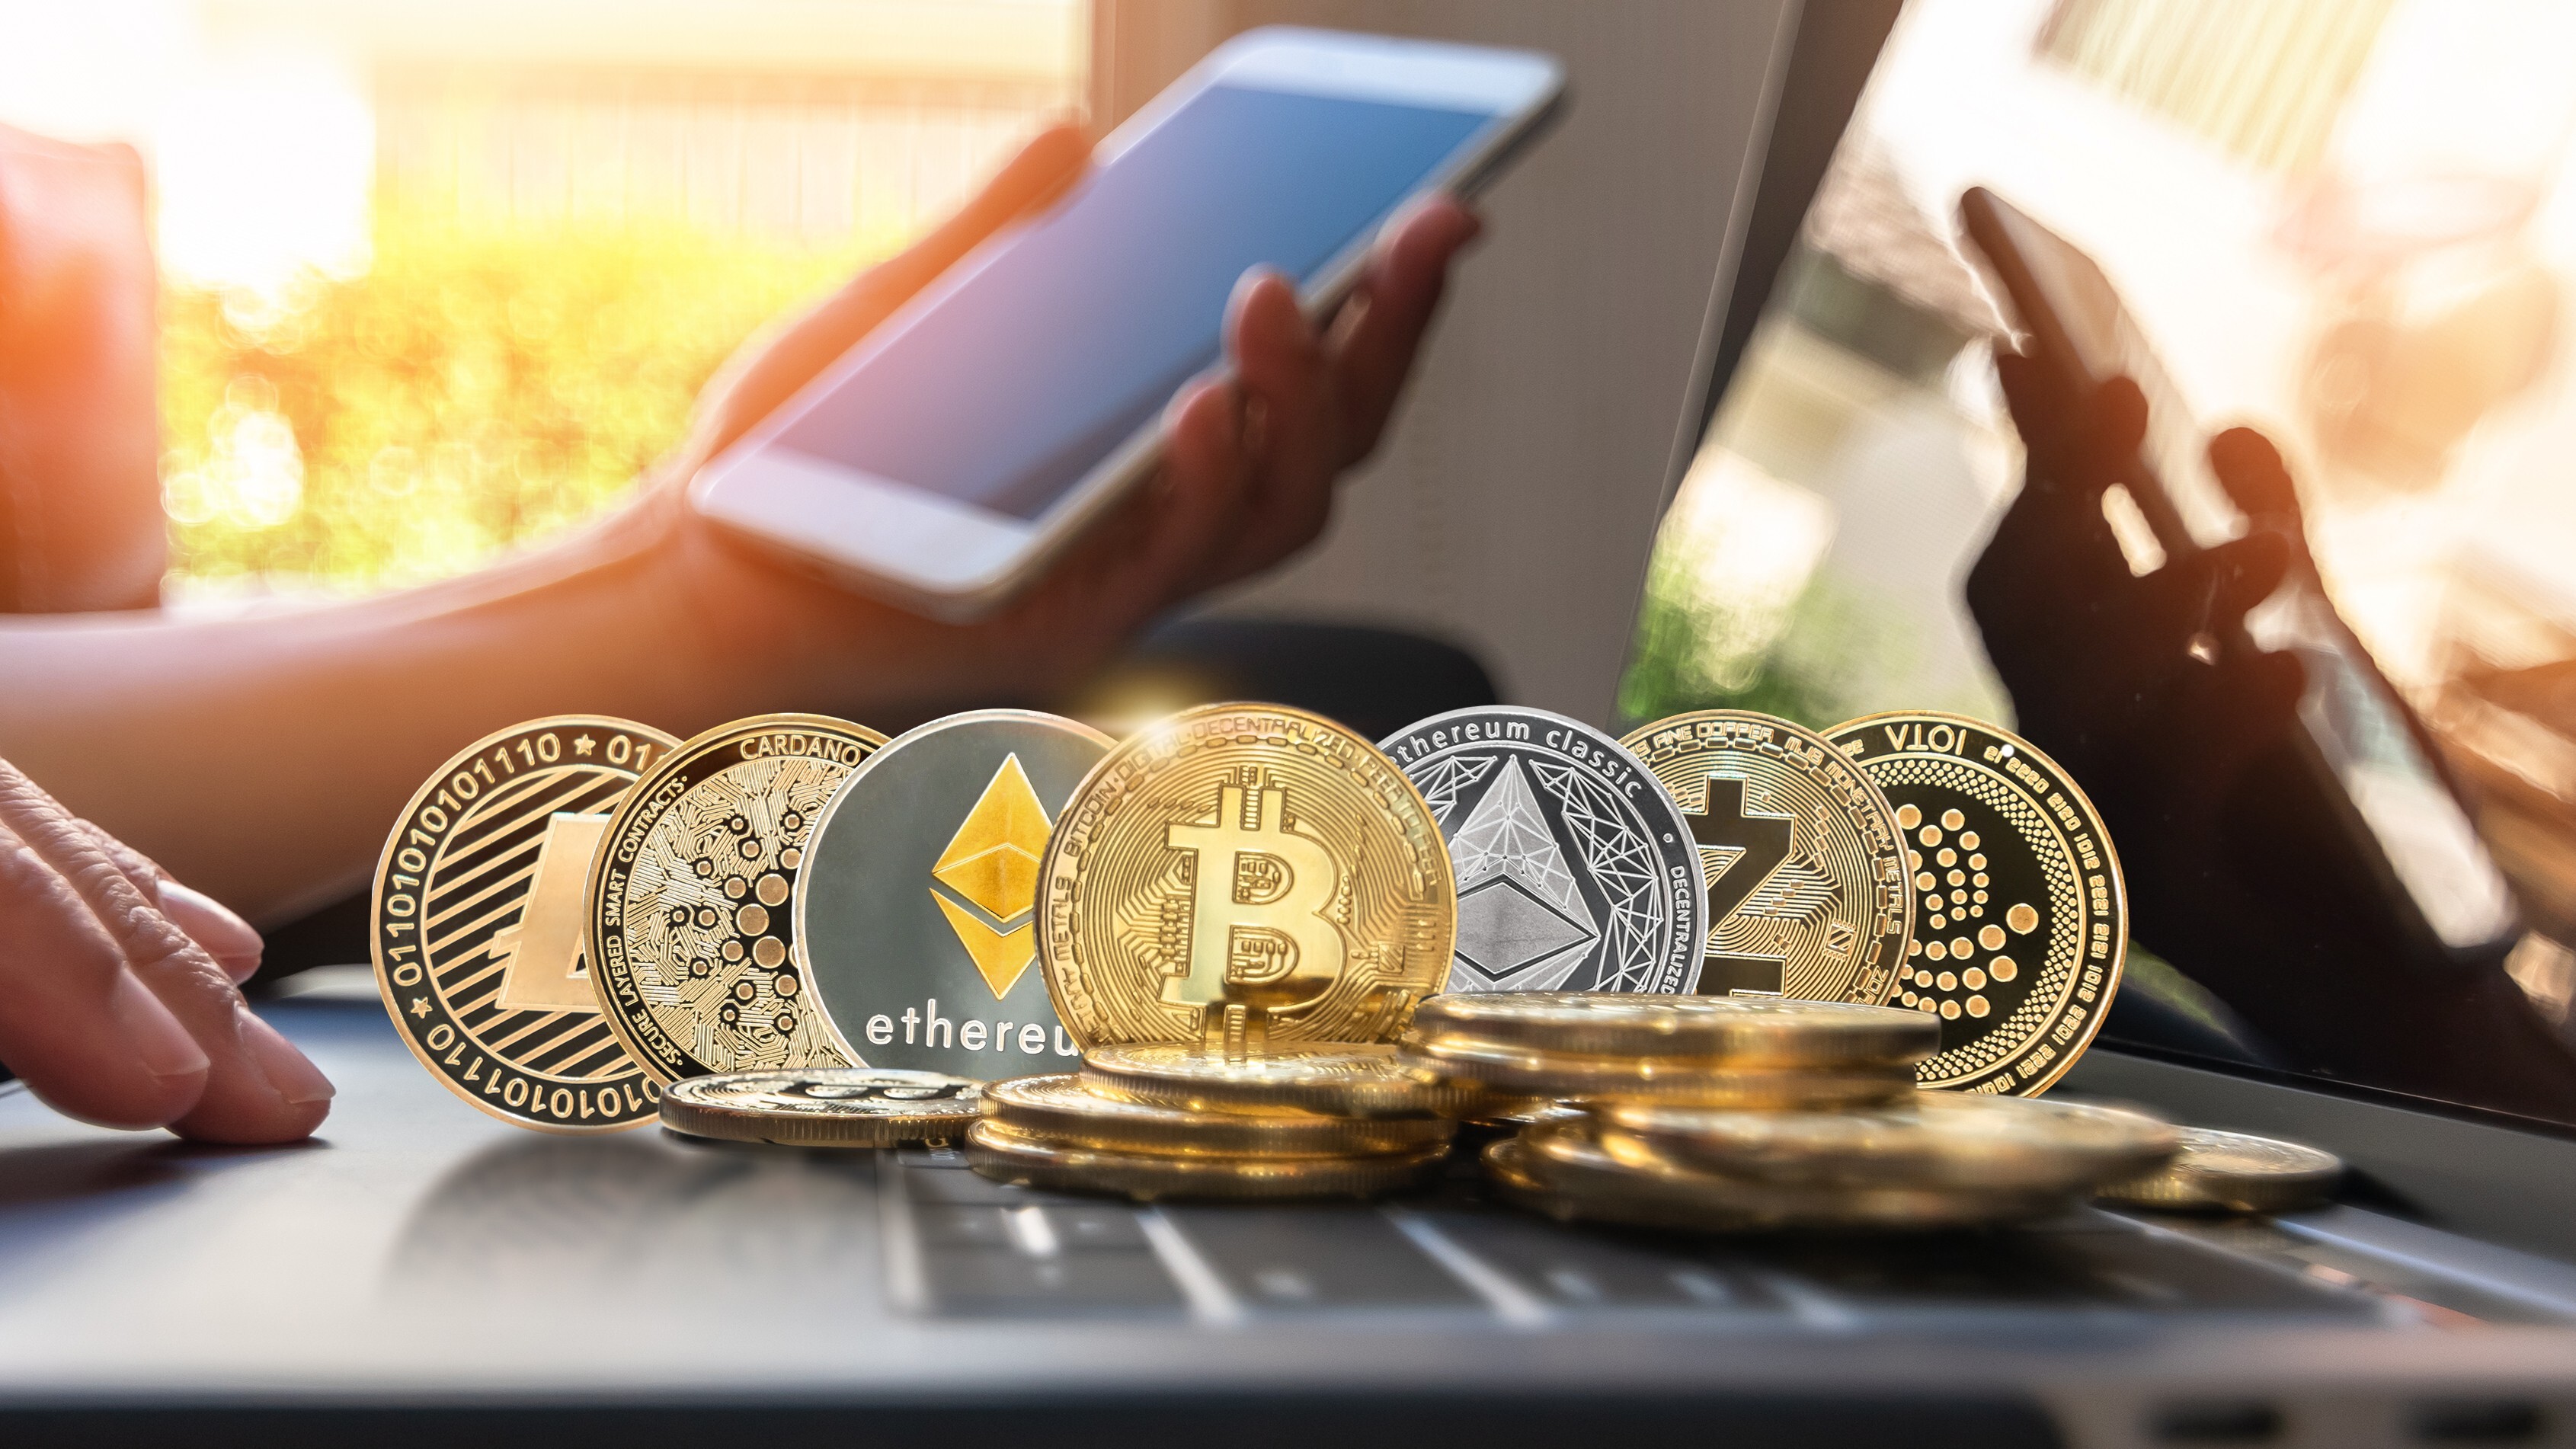 A survey of 385 family offices around the world showed a greater appetite in Asia for investing in new asset classes like cryptocurrency. Photo: Shutterstock